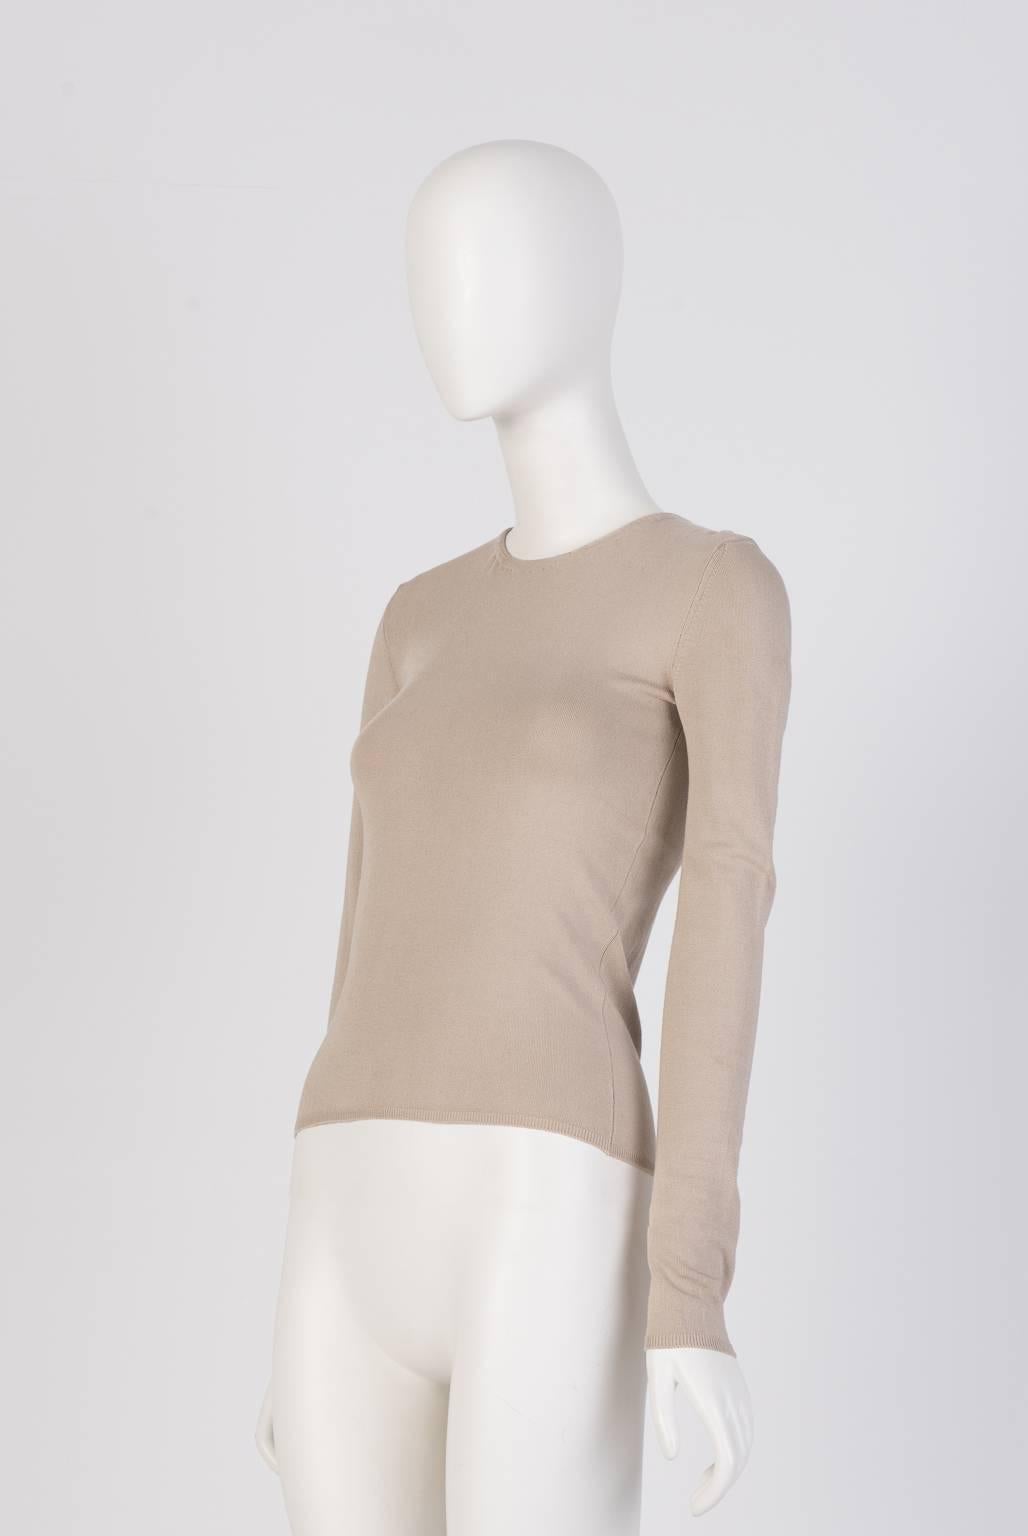 Fitted Prada silk knit top in taupe with back zip closure. 